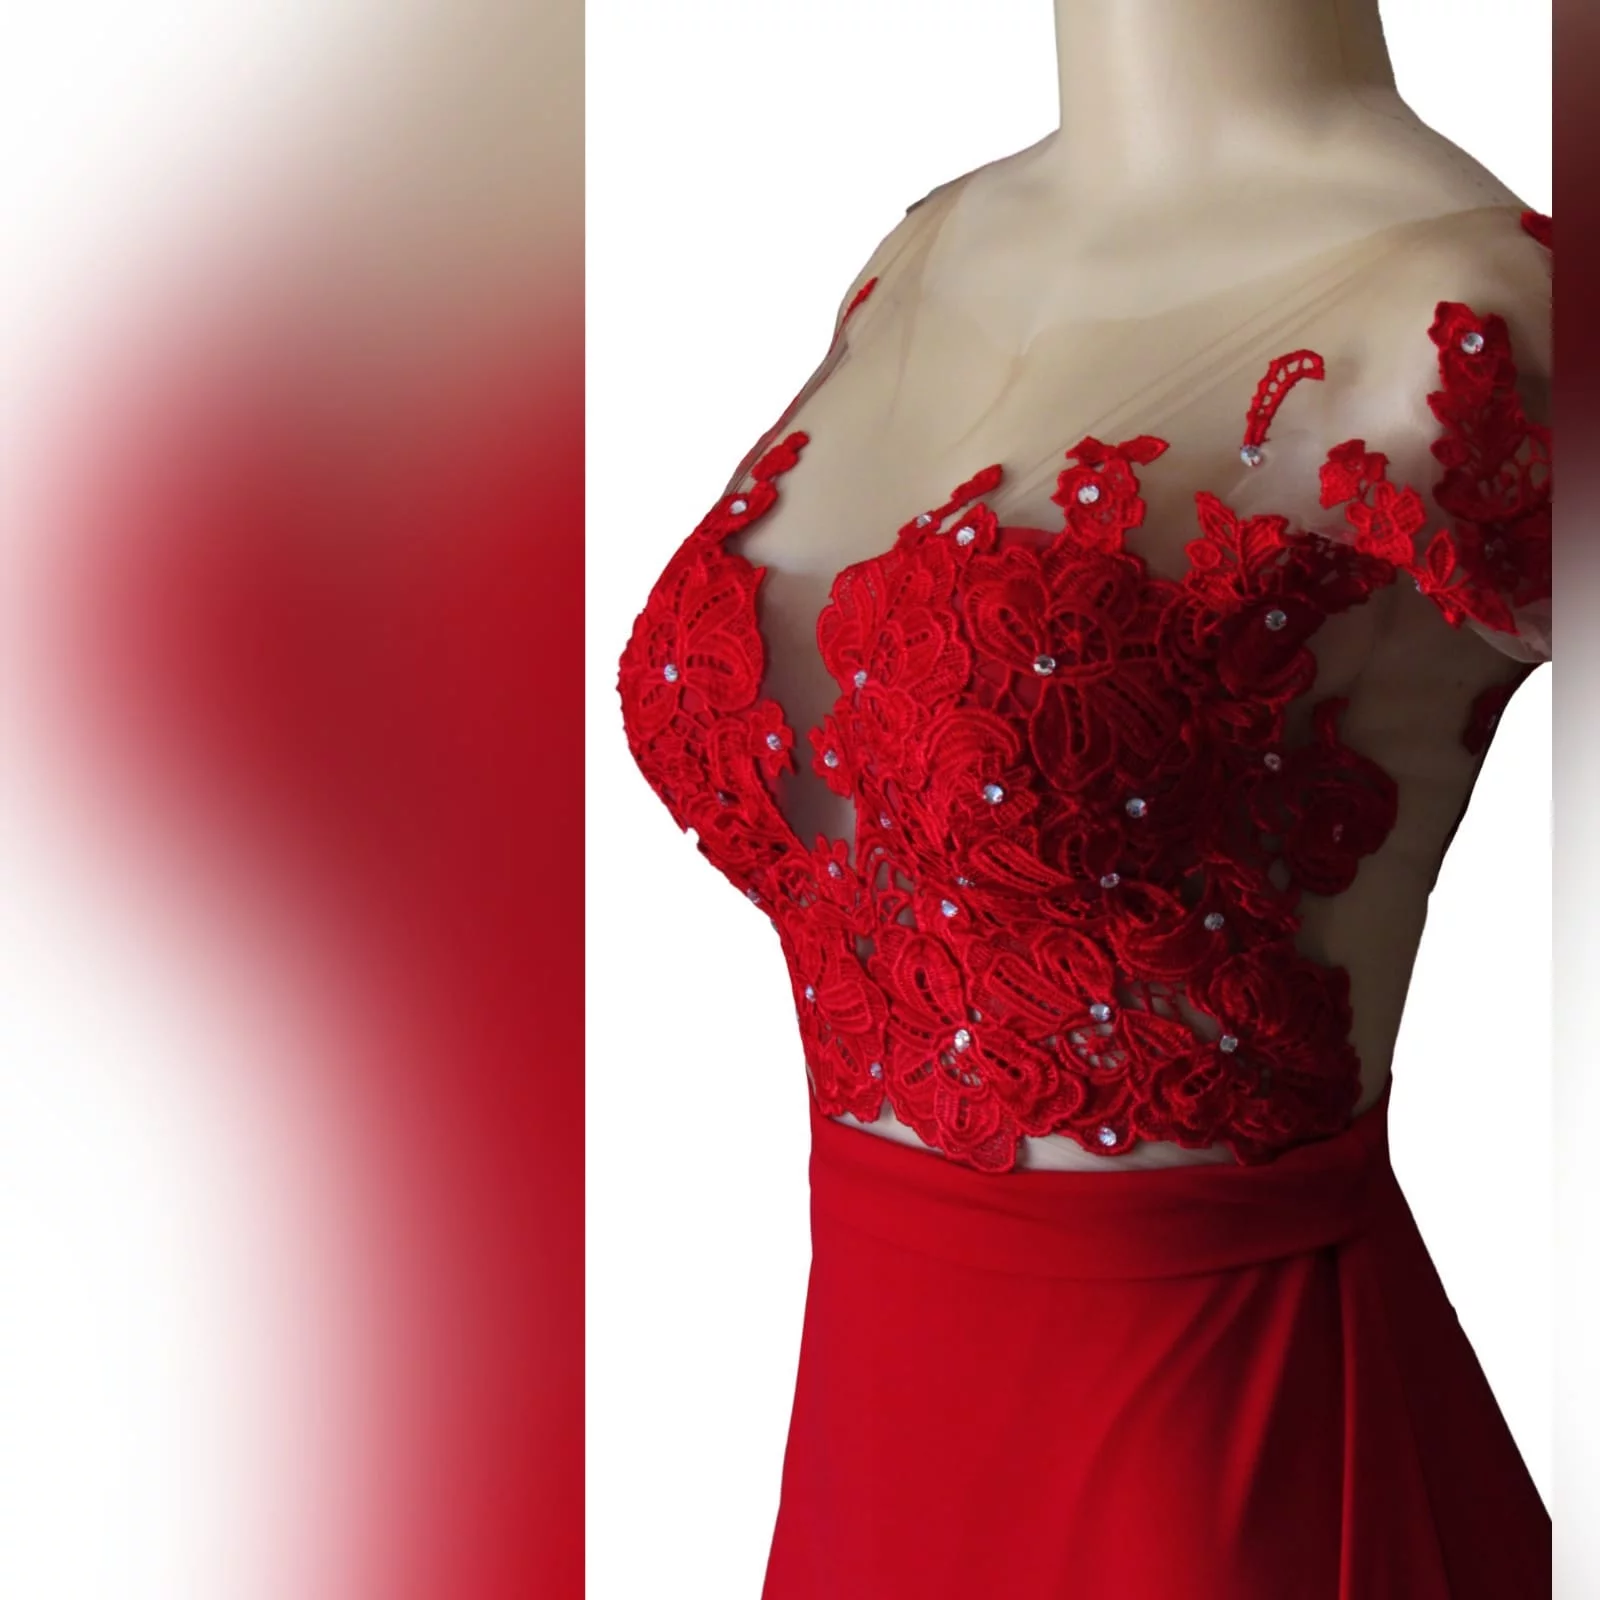 Red flowy lace bodice prom dress 9 red flowy lace bodice prom dress. With an illusion lace bodice detailed with silver beads and buttons. Evening dress with a slit and a train.